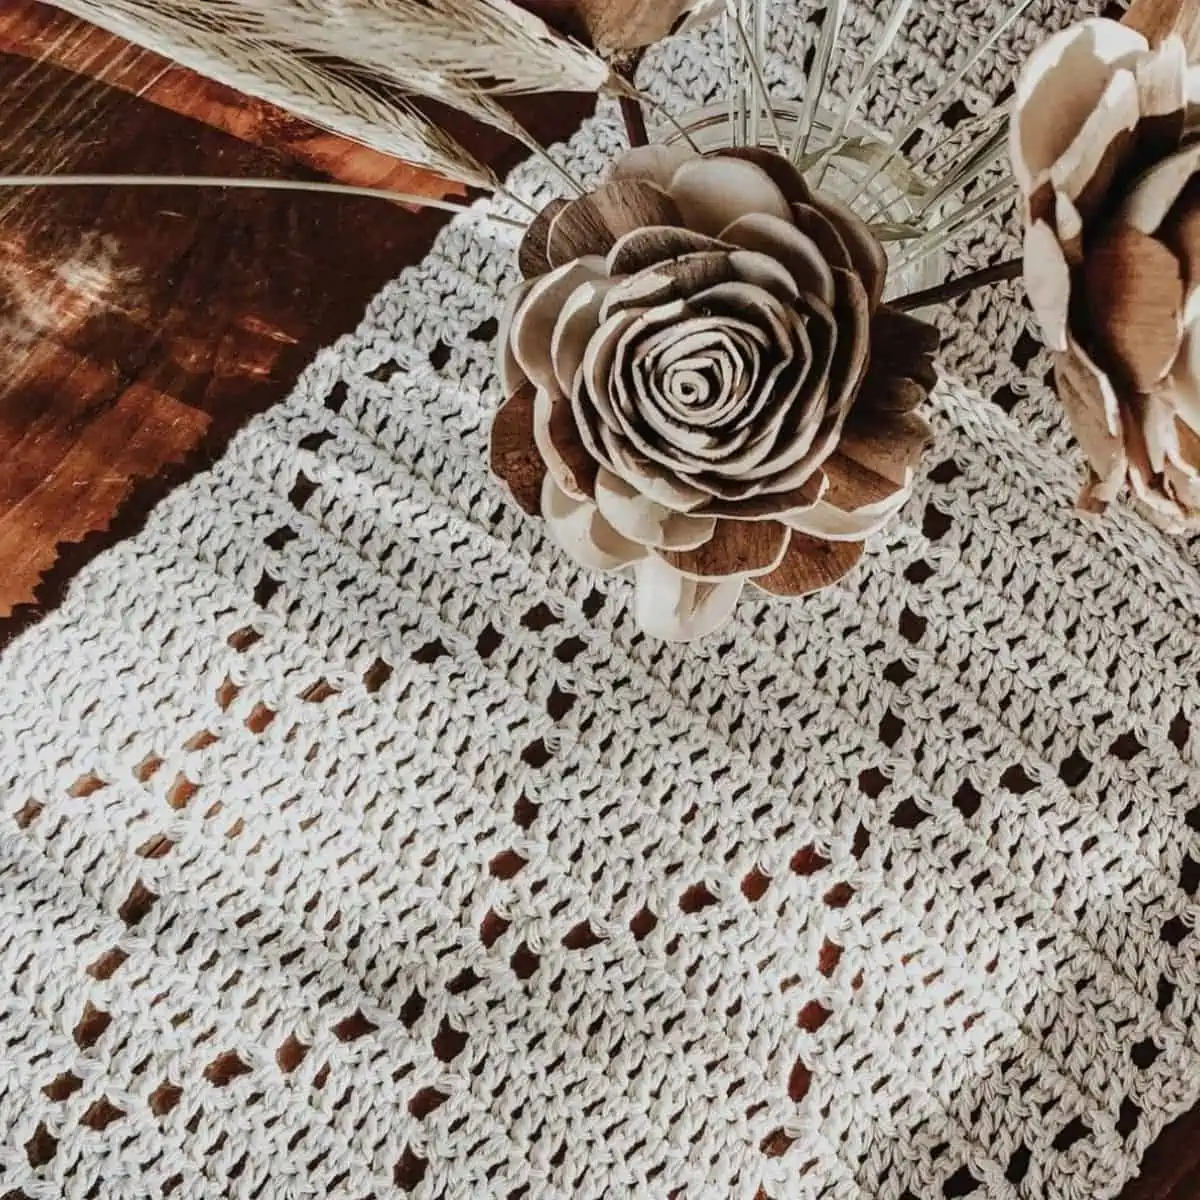 dried flowers and a crochet runner with a diamond pattern